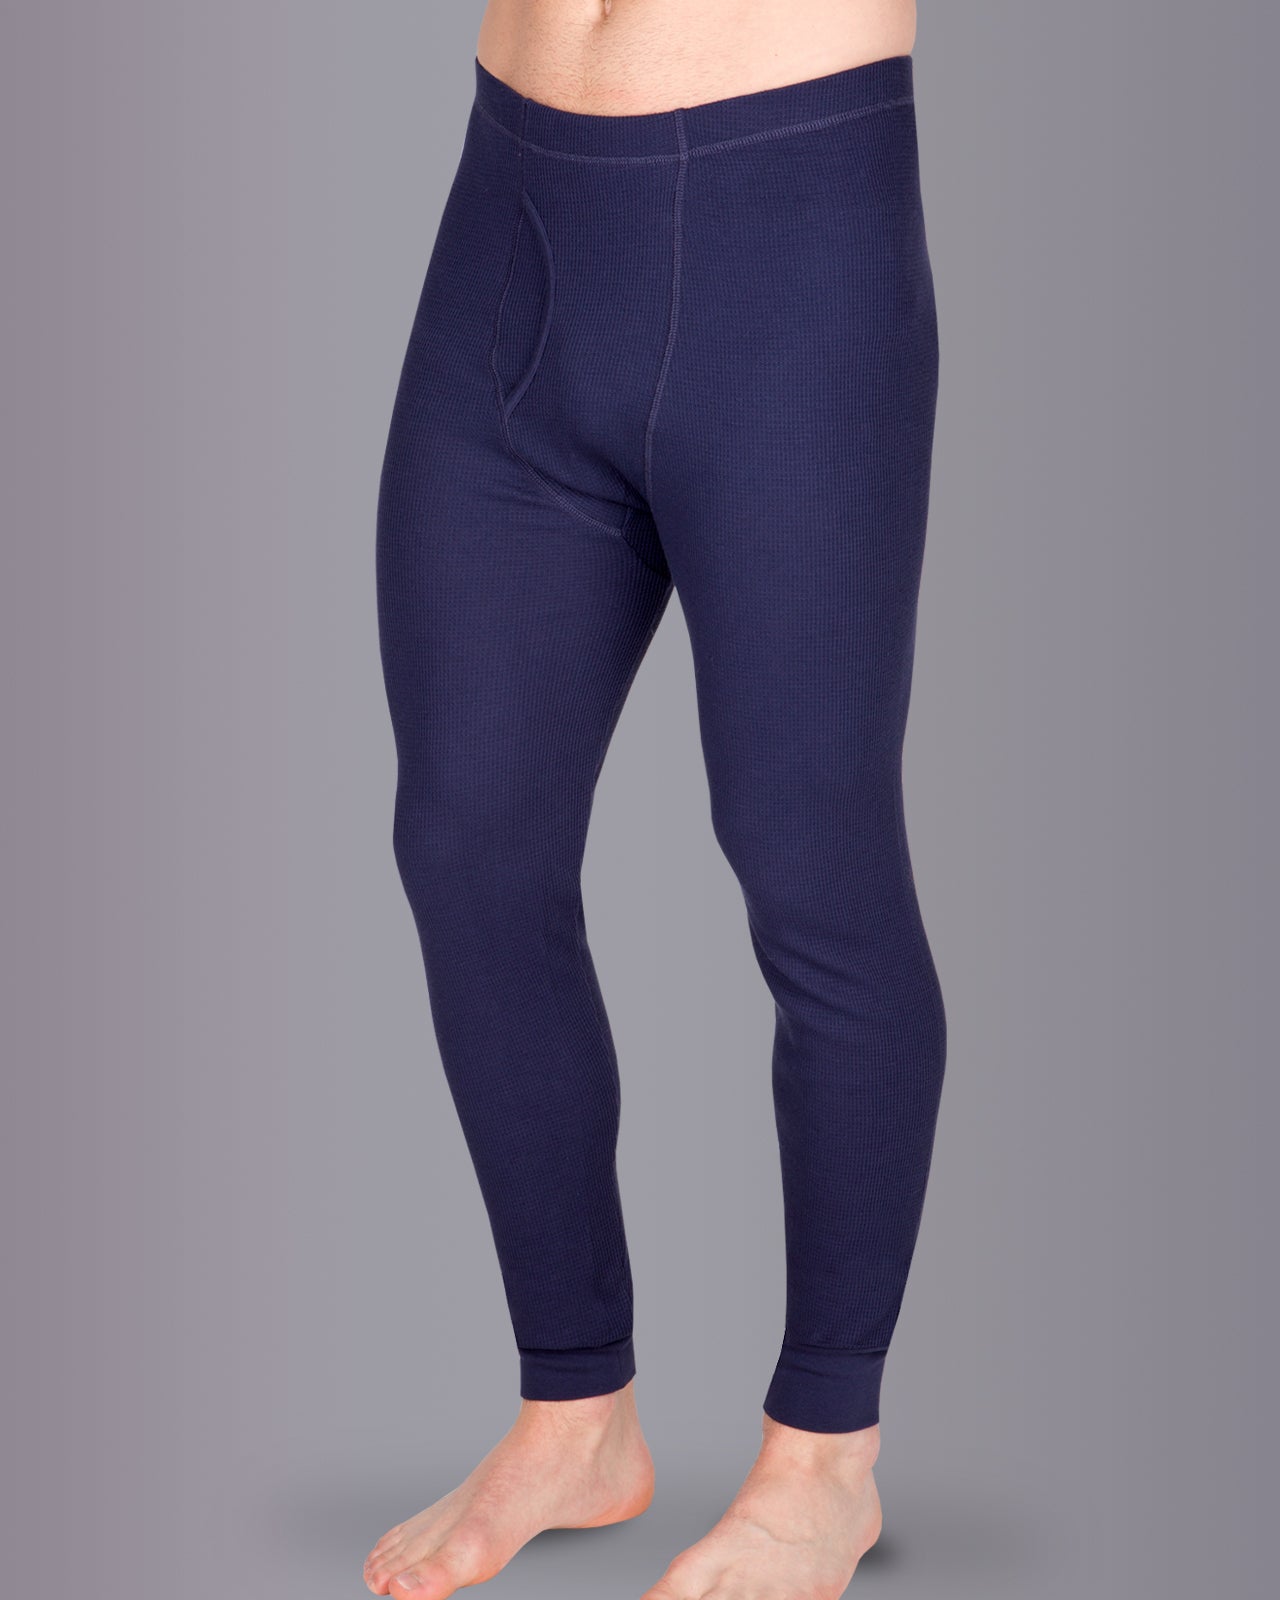 Women Thermals: Thermal Underwear, Tops, Pants & More